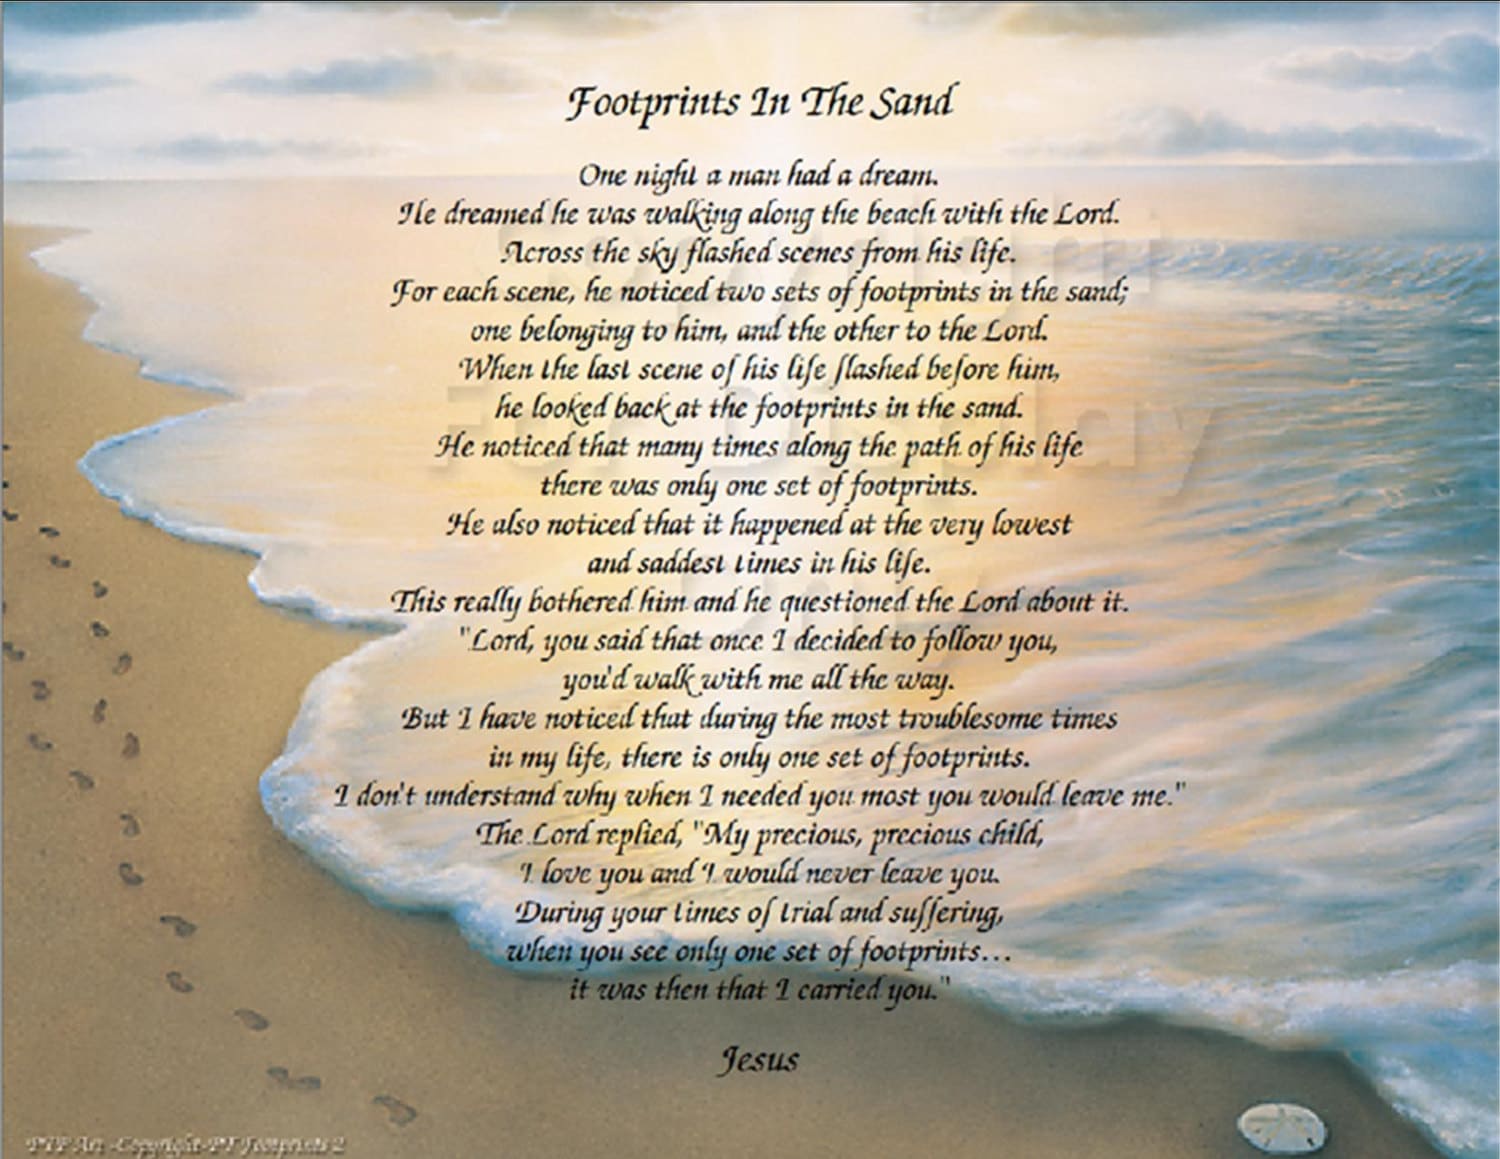 The Footprints in the Sand poem Christian Poem